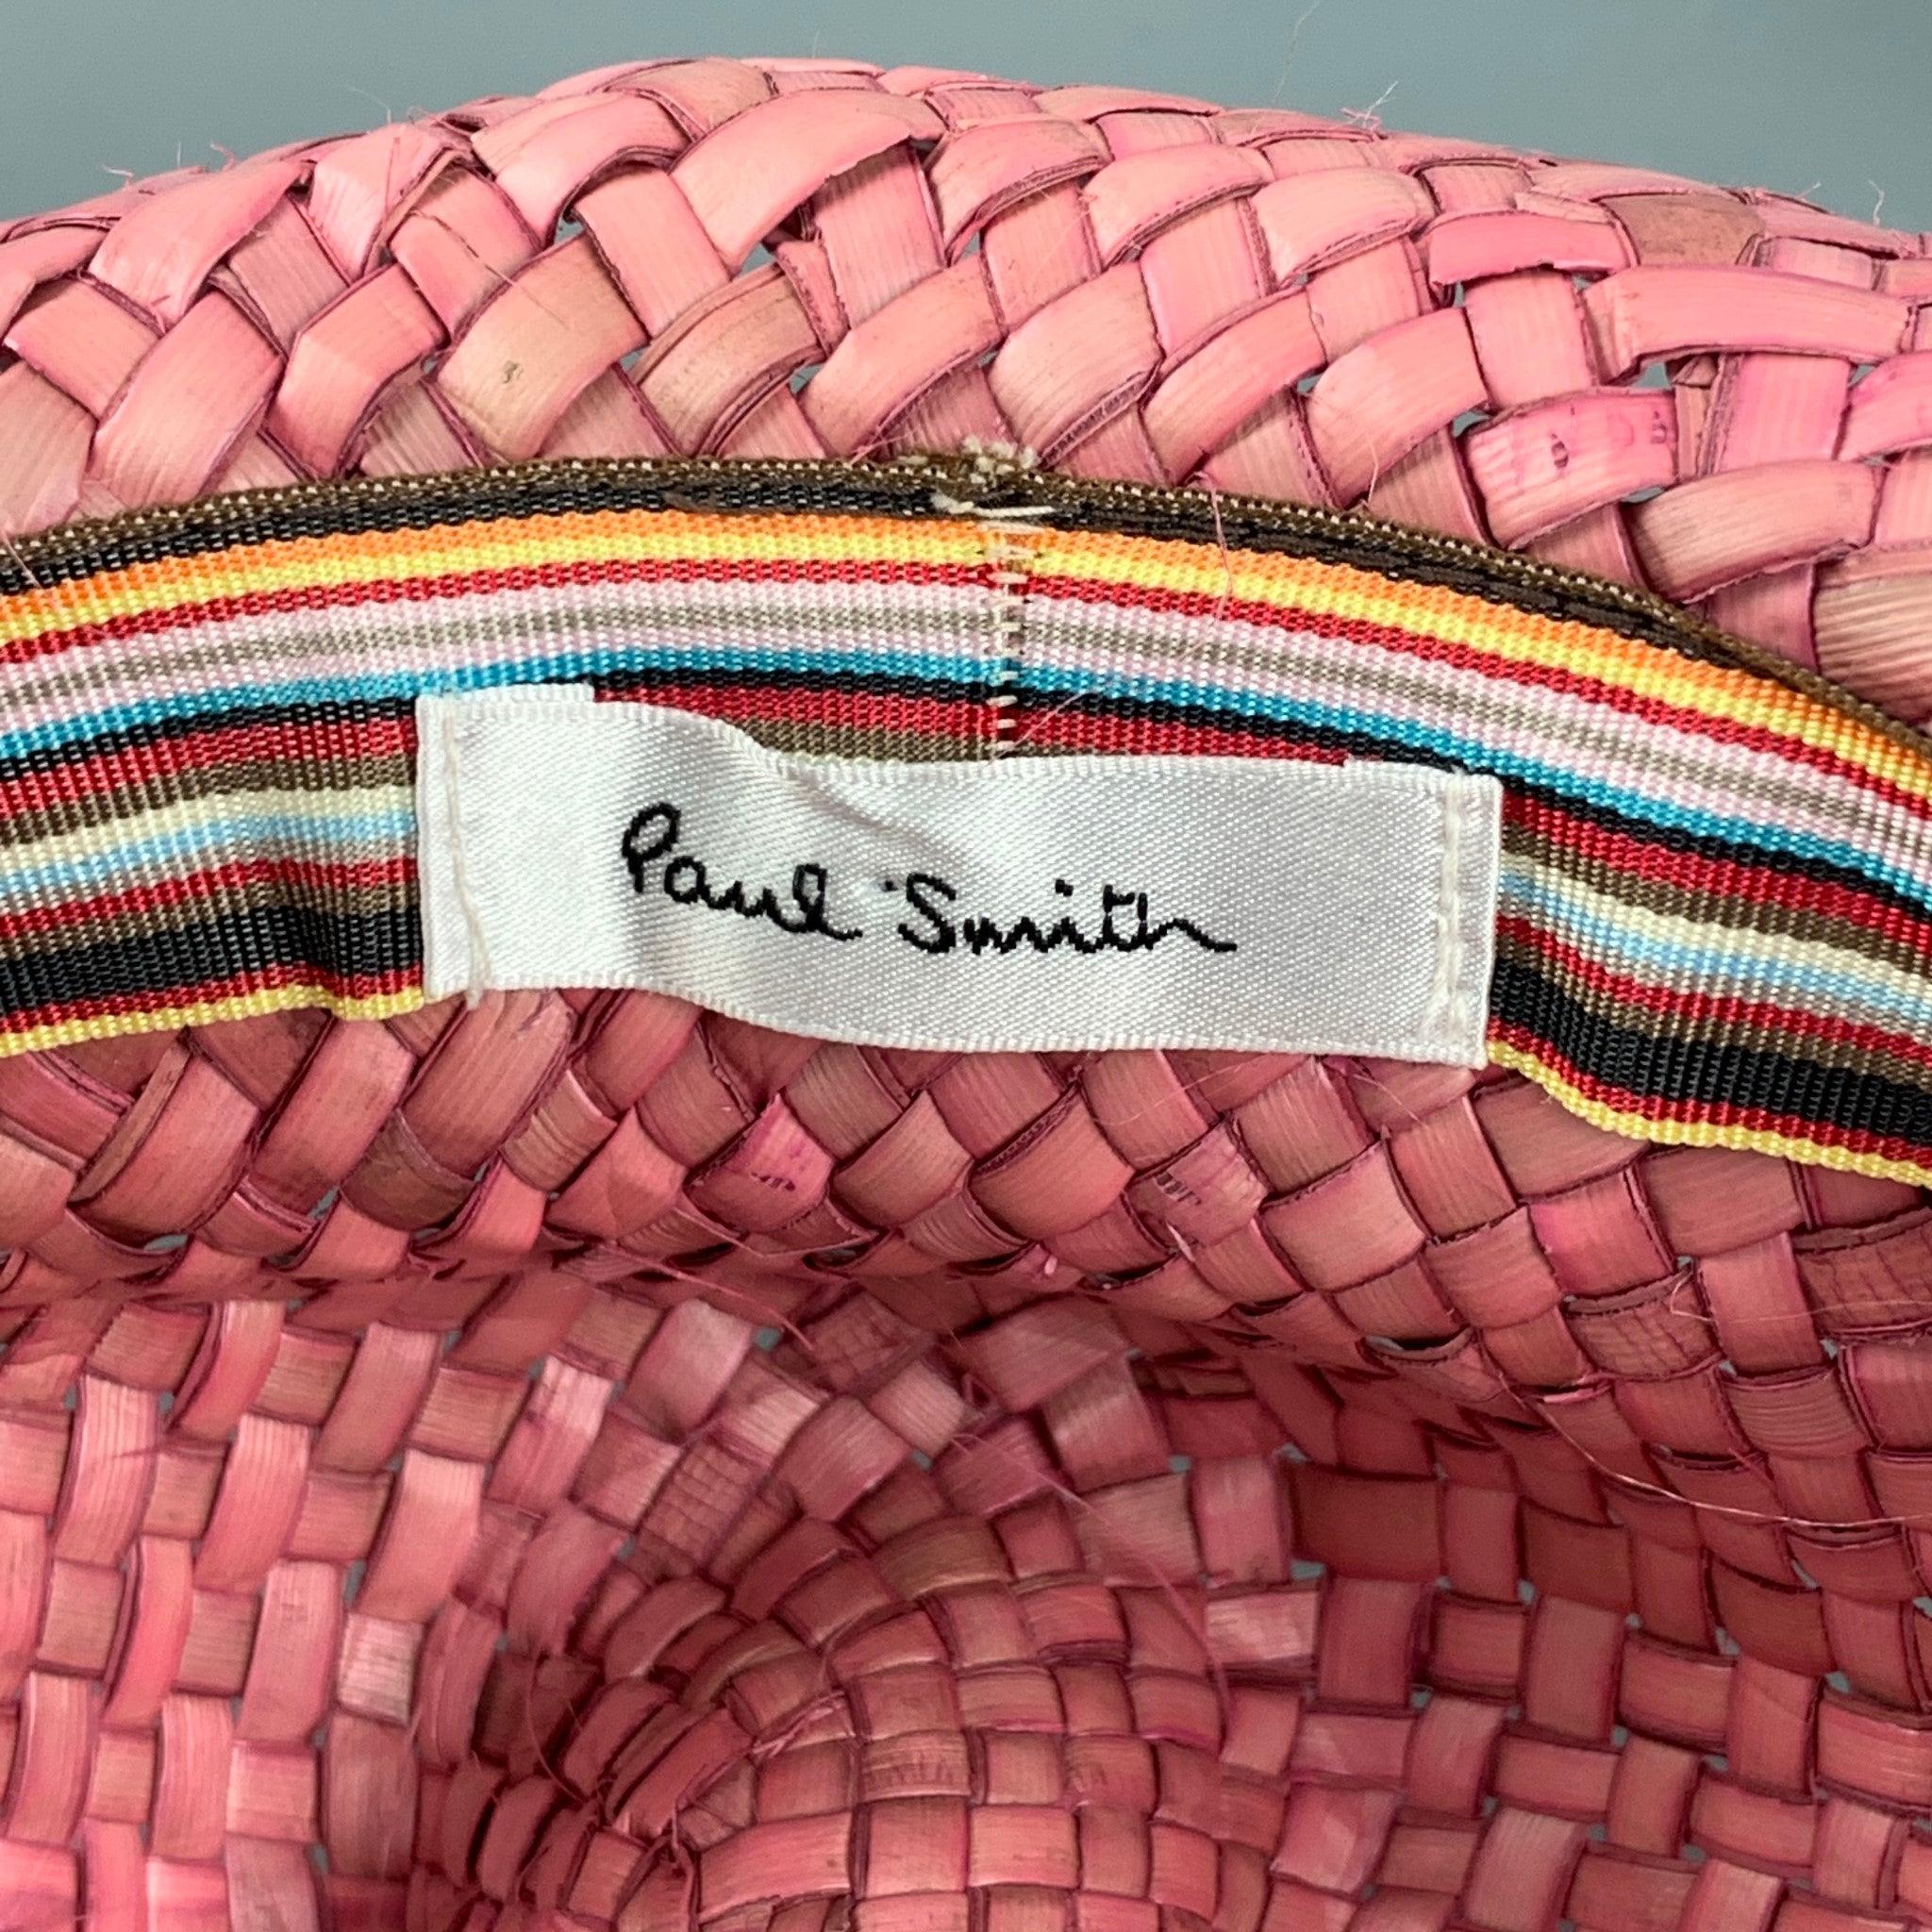 PAUL SMITH Pink Woven Straw Floral Band Hat 1